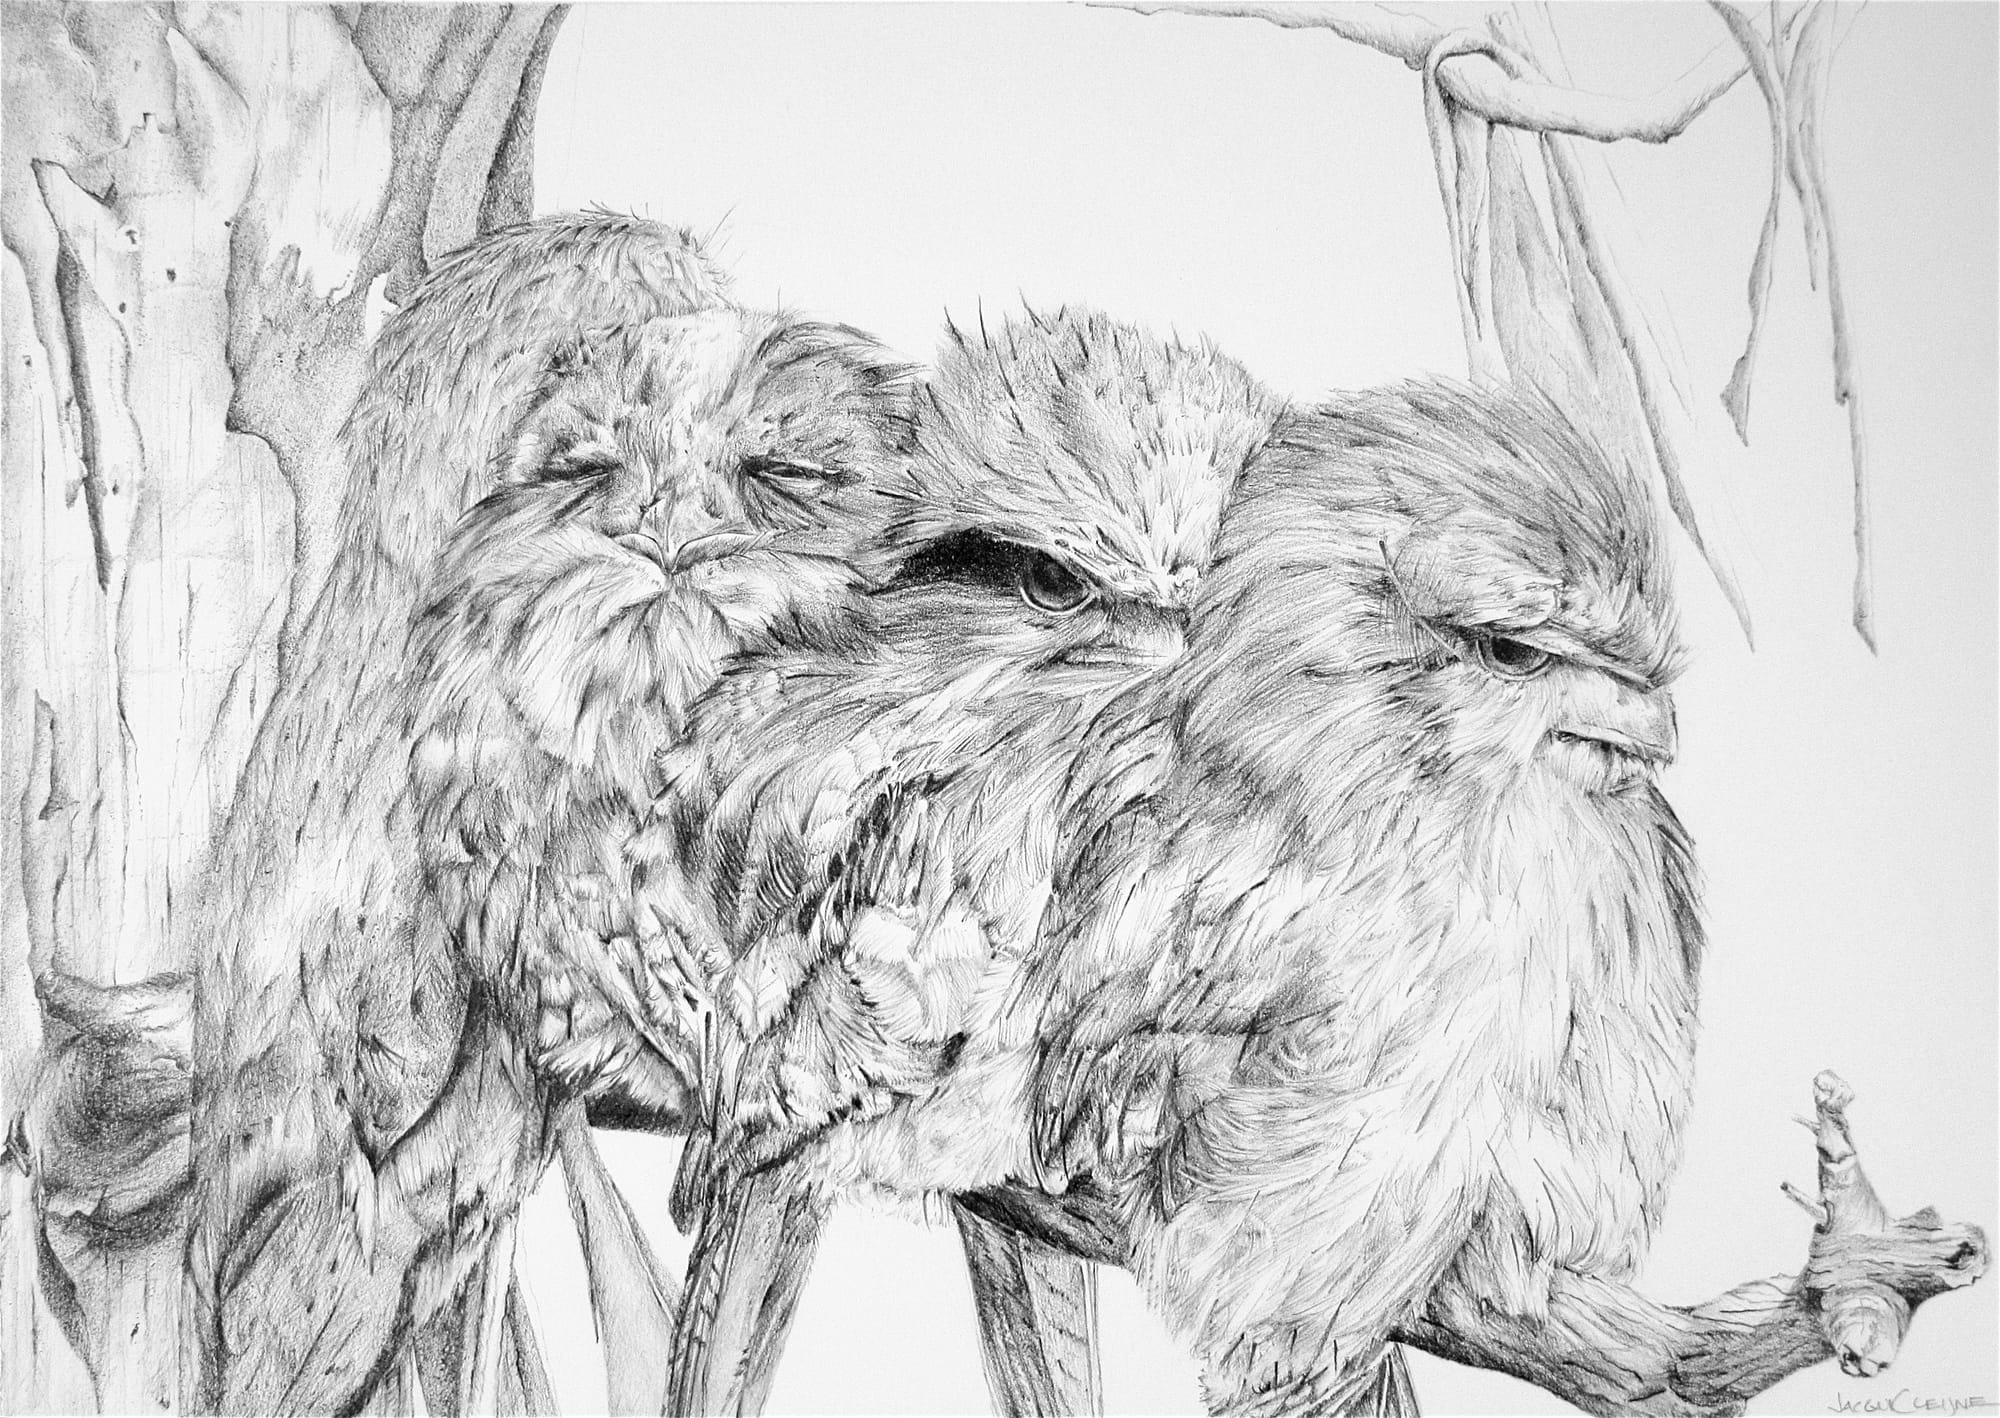 Tawny  Frogmouth Family Series - SOLD